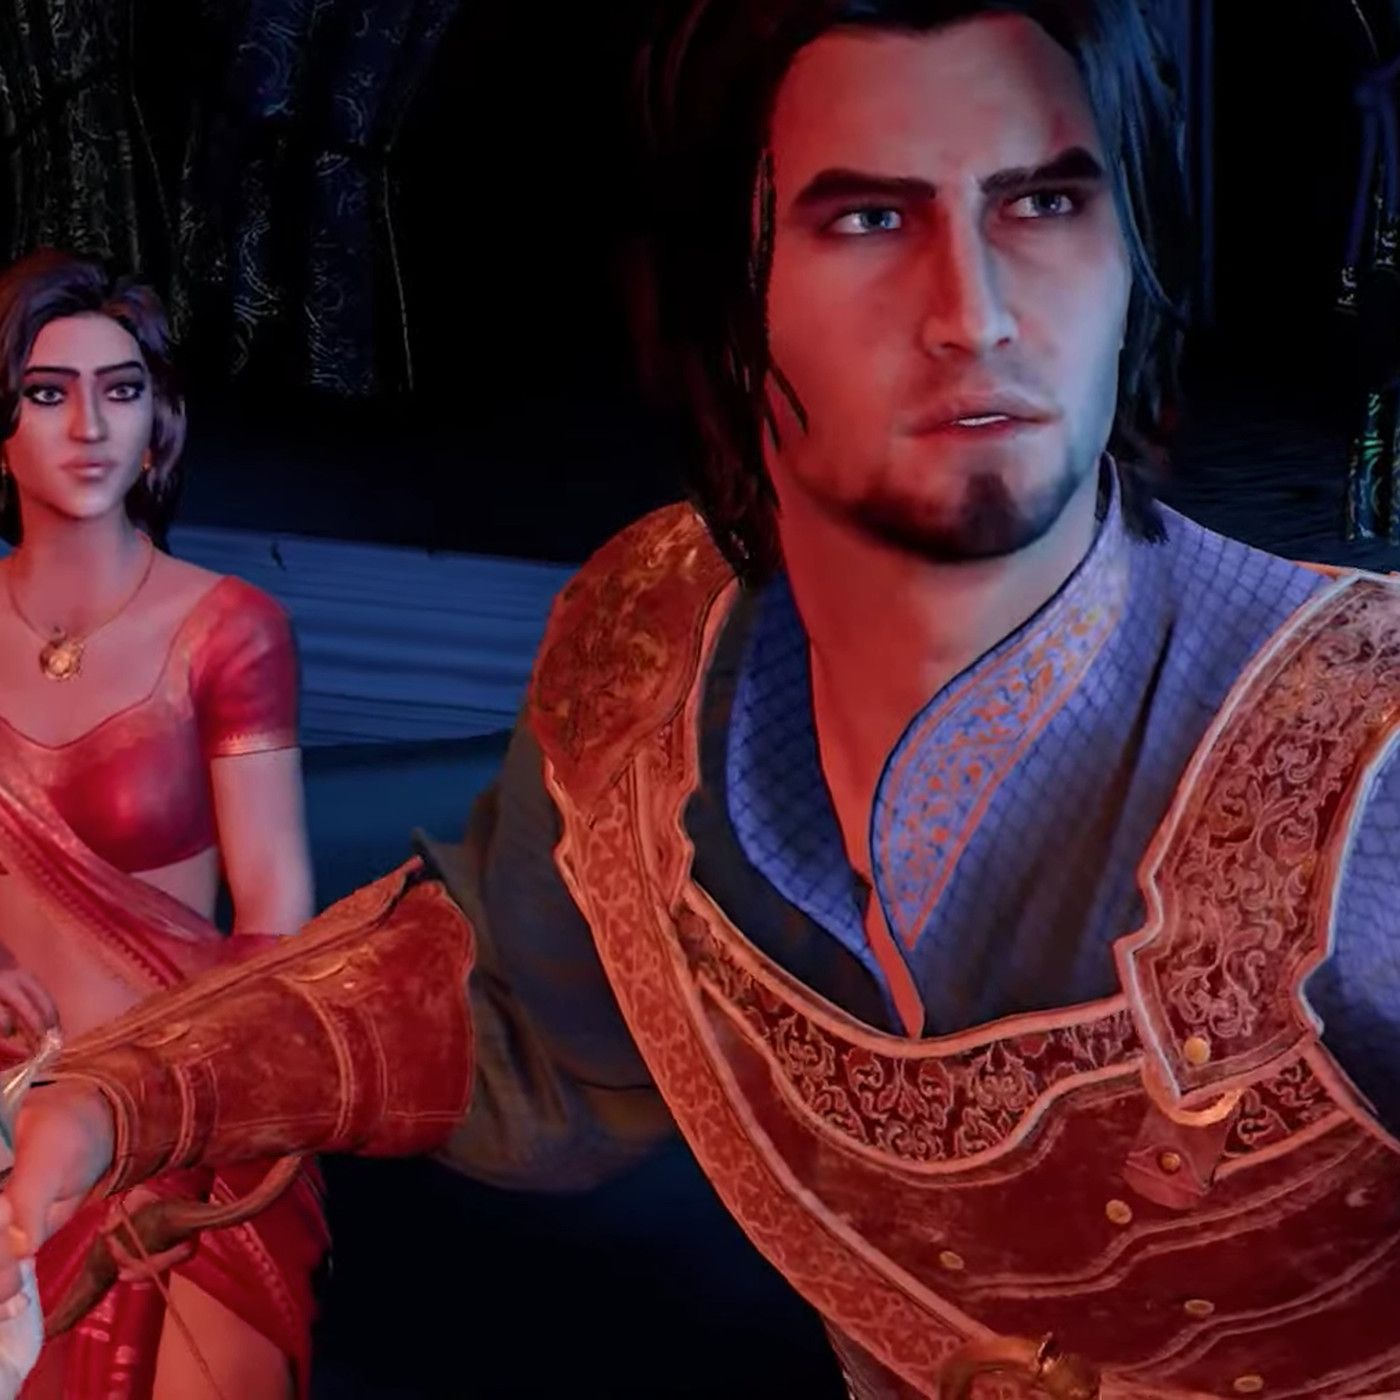 Prince of Persia: The Sands of Time remake coming in 2021